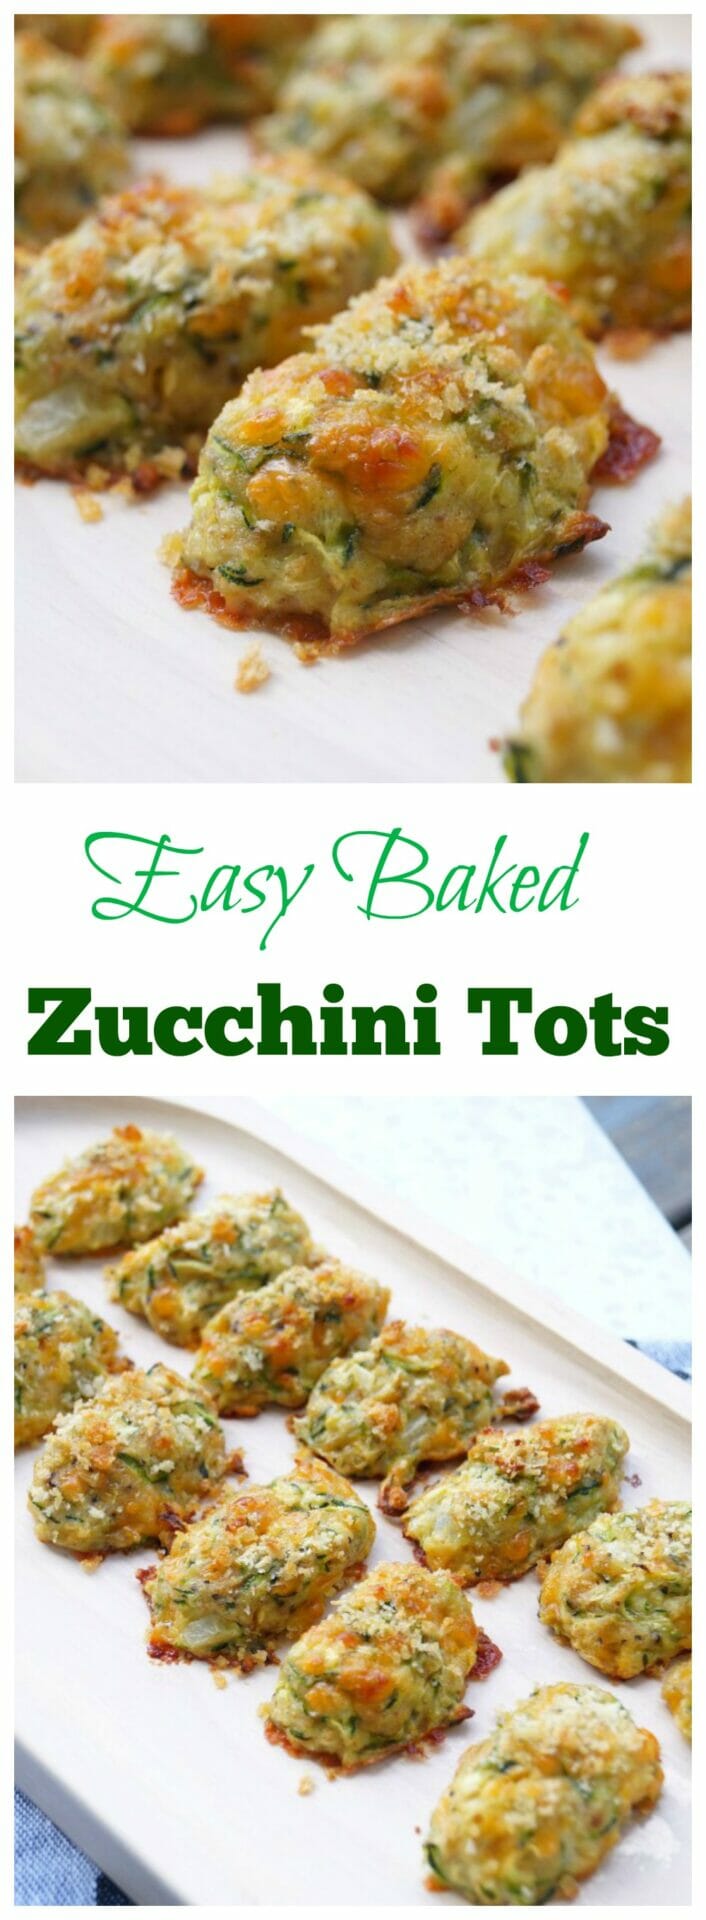 Easy Oven Baked Zucchini Tots